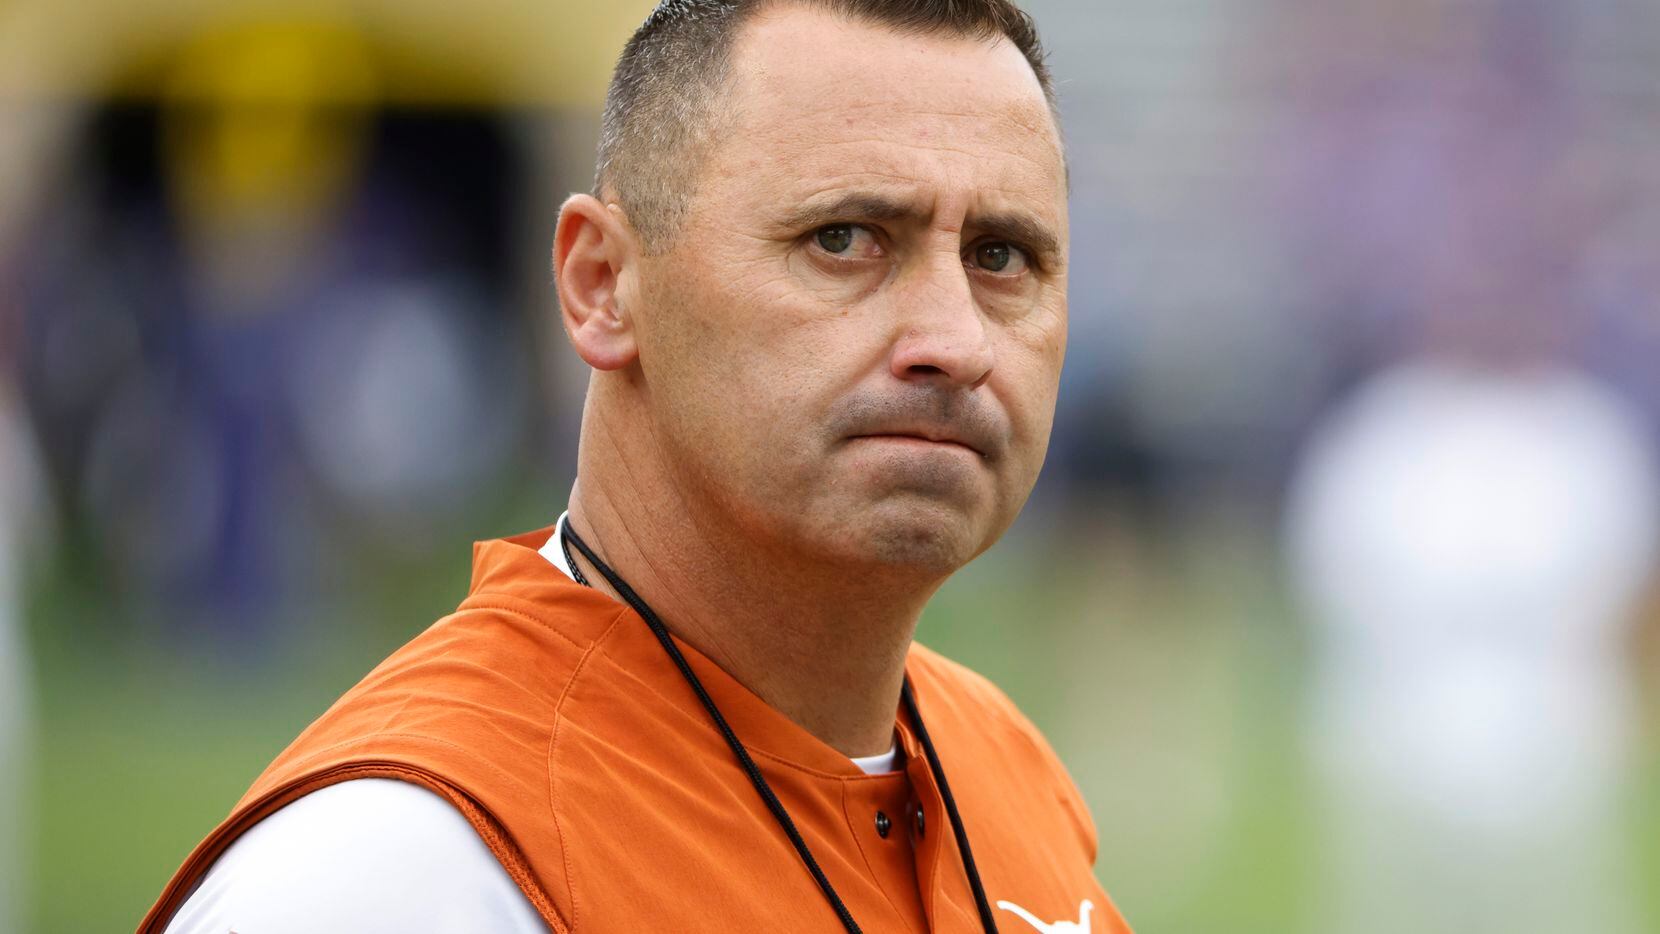 Texas coach Steve Sarkisian believes Longhorns' future is 'very bright'  despite historical awfulness